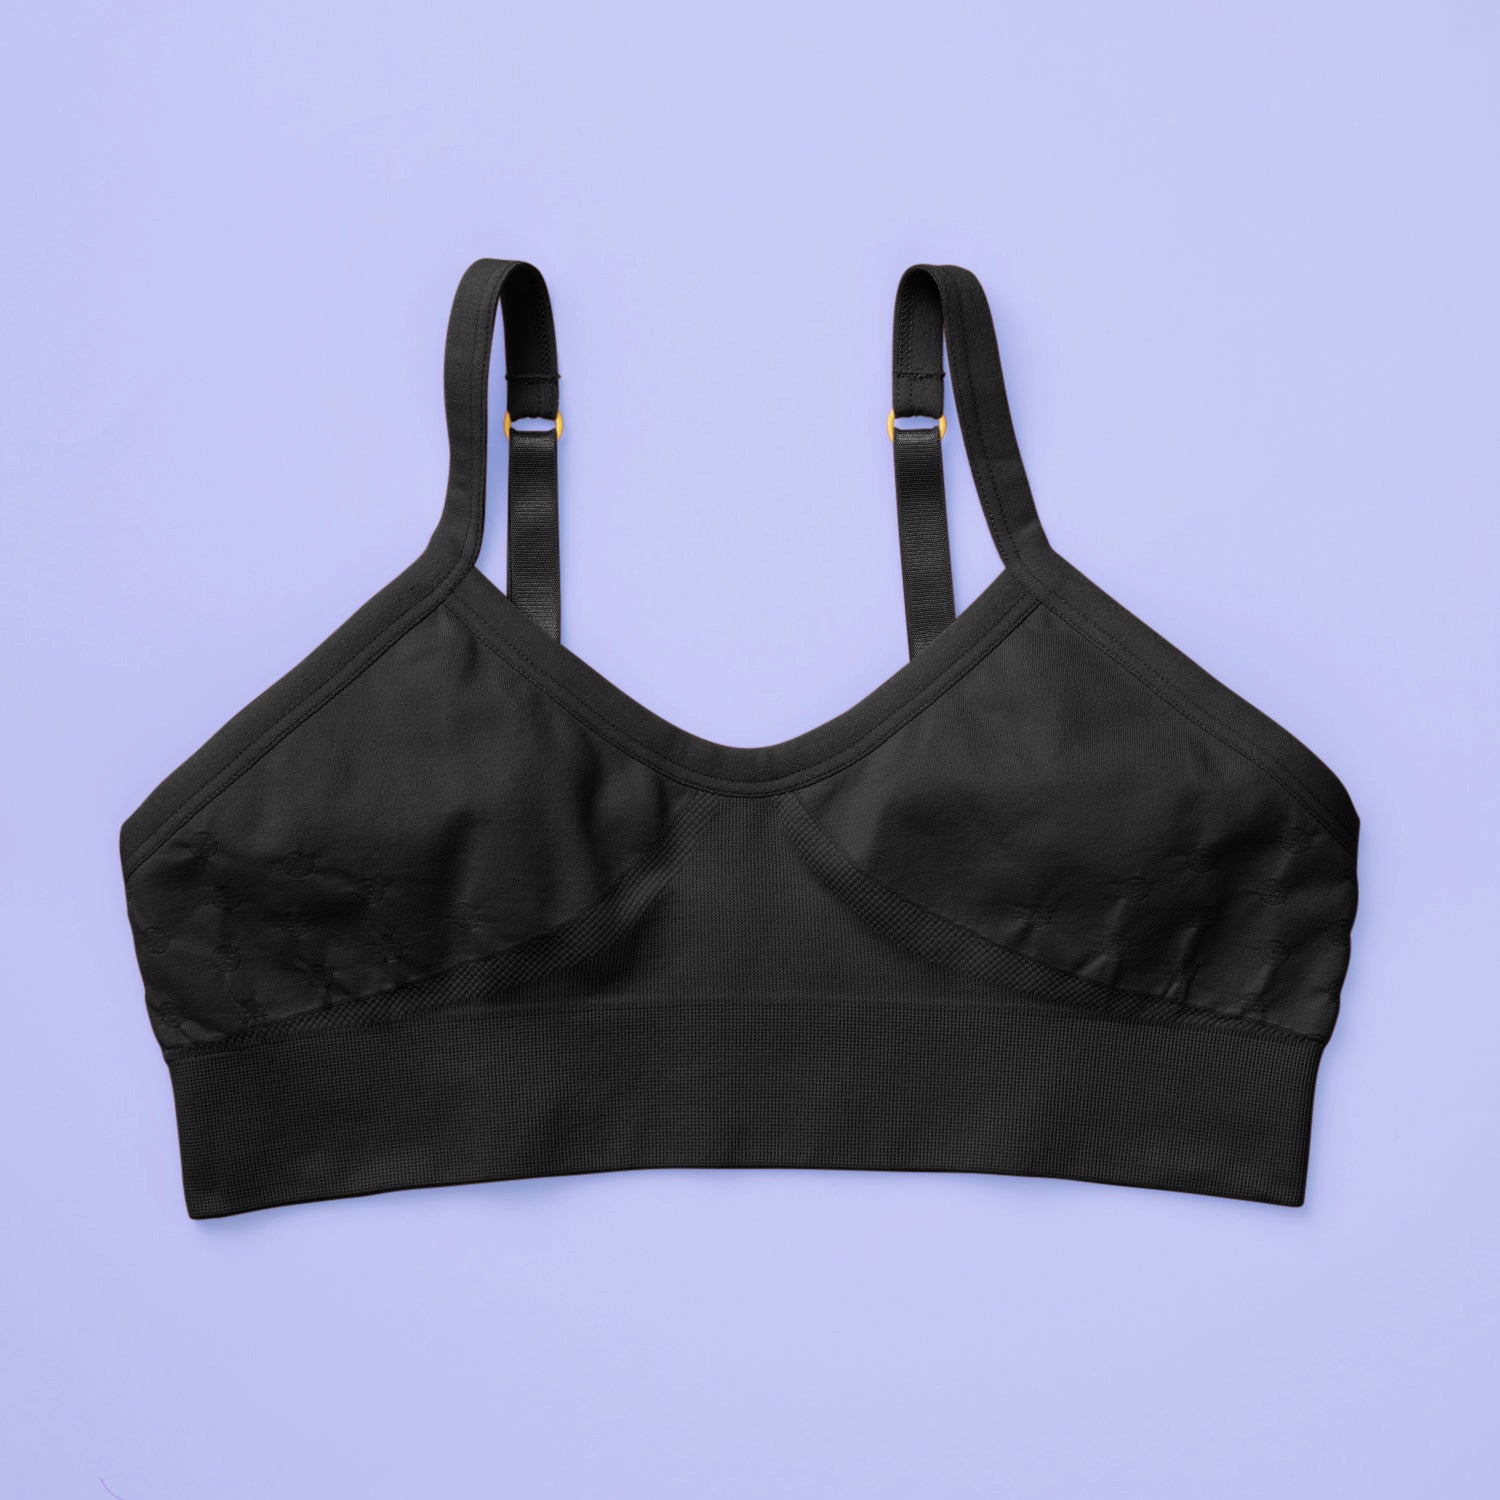 URBANIC Black & Yellow Training Sports Bra Price in India, Full  Specifications & Offers